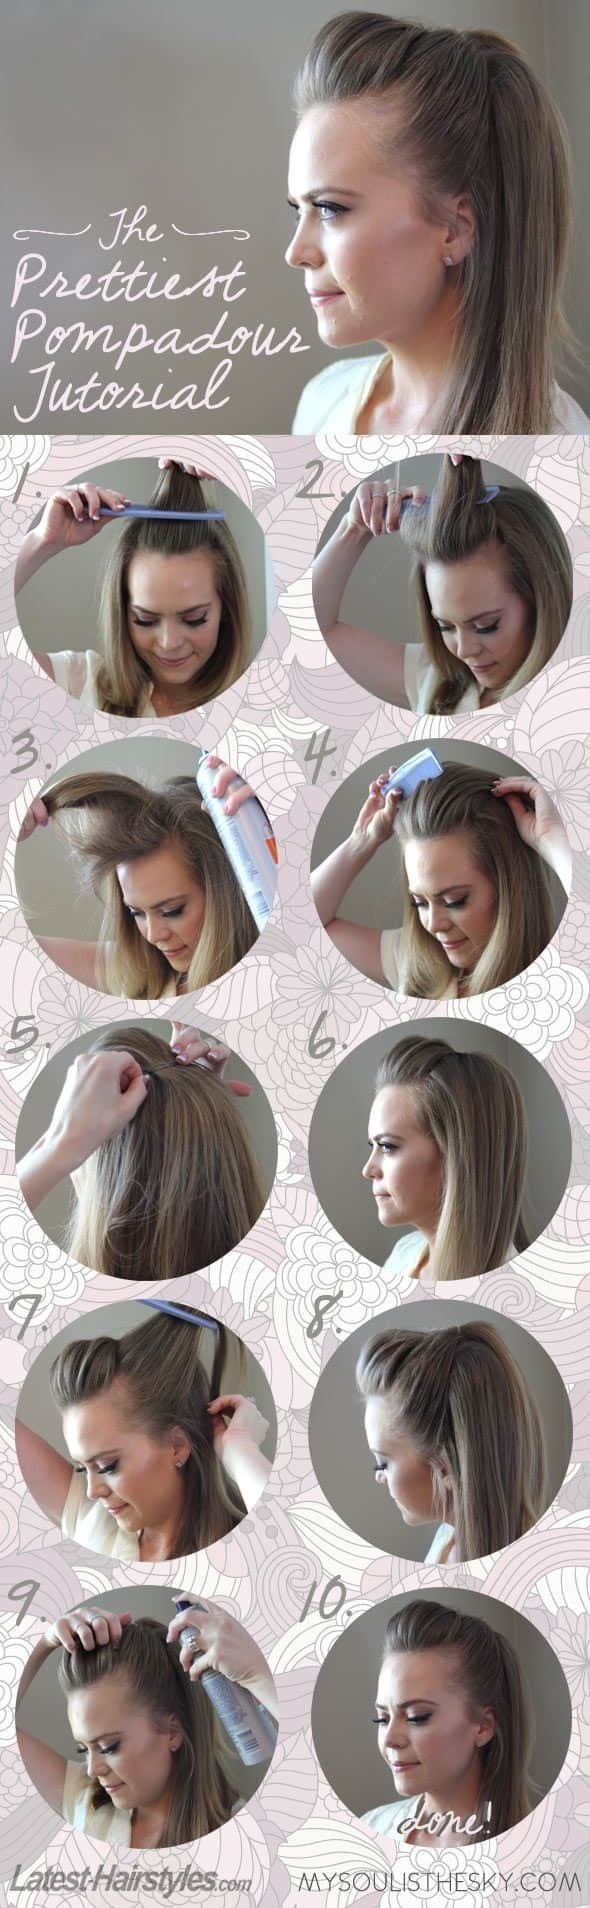 Awesome Hairstyle Tutorials That You Can Do In Less Than 5 Minutes